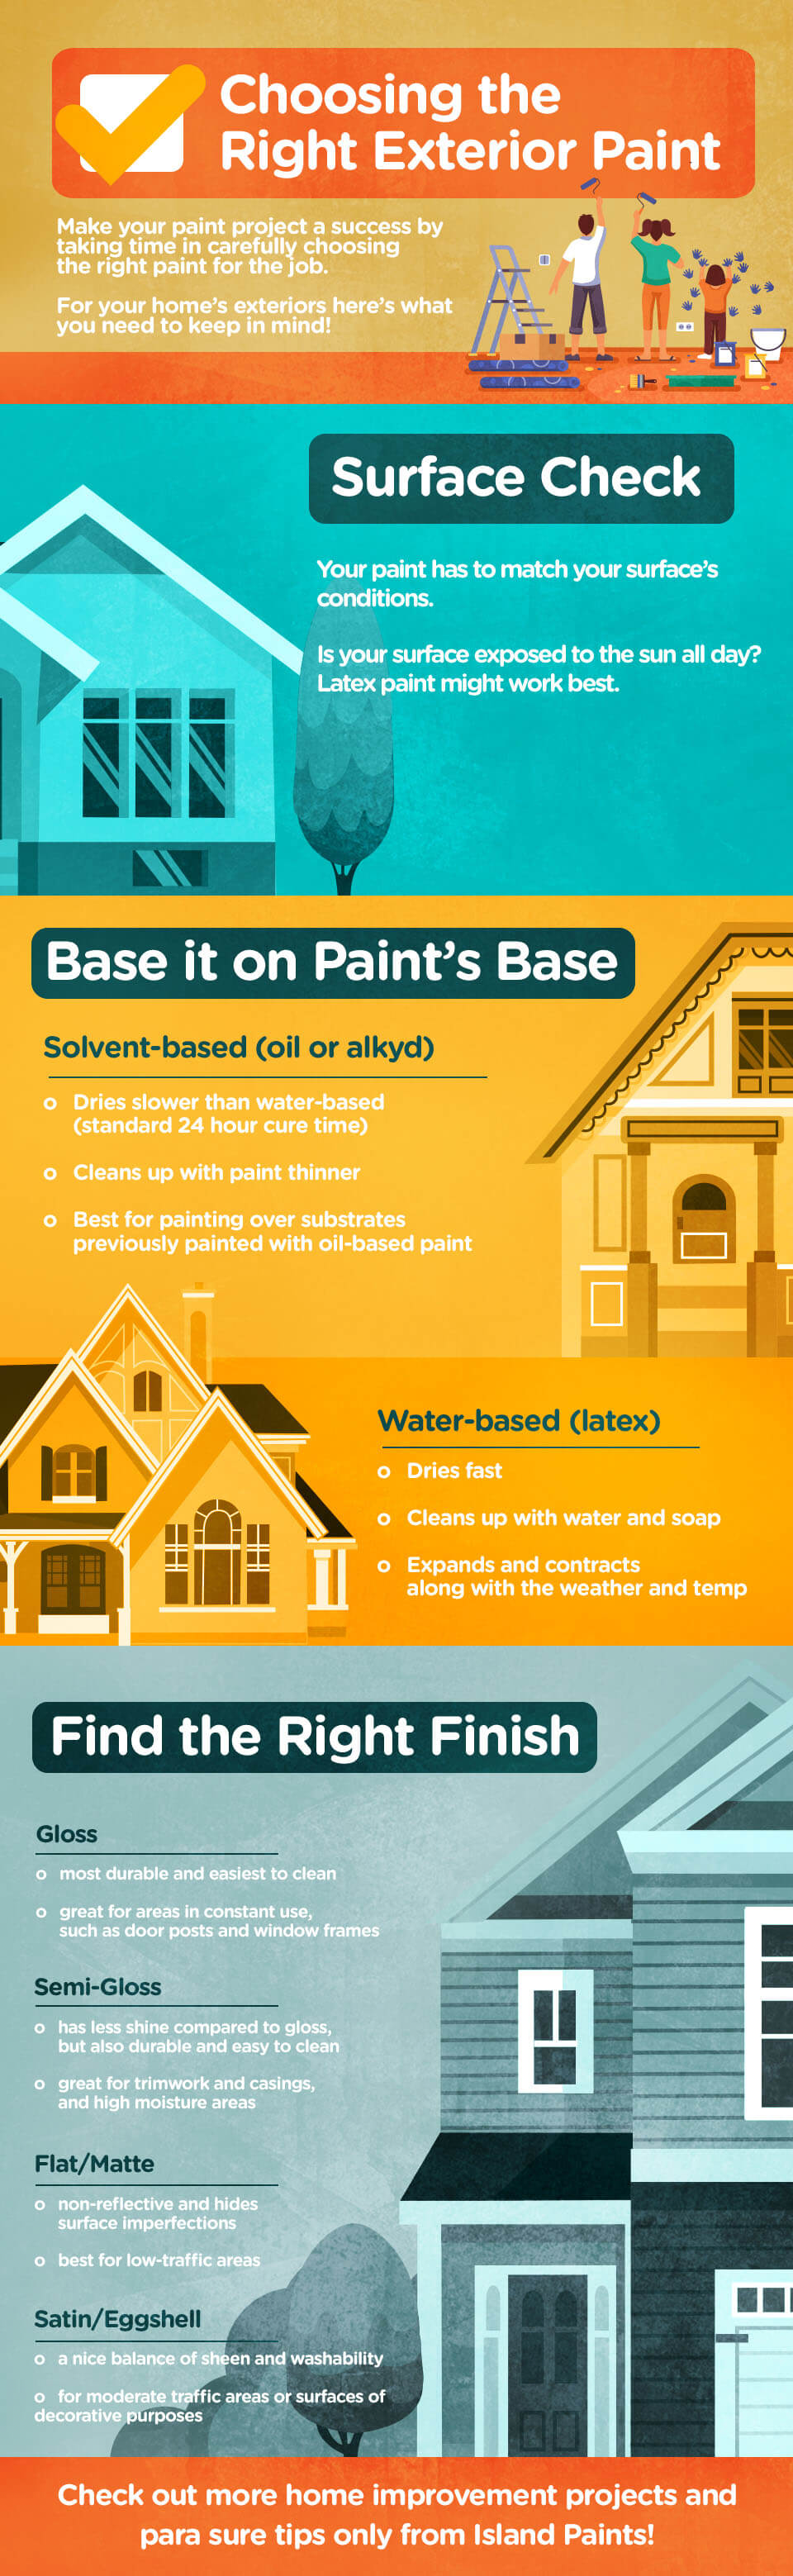 Choosing the Right Exterior Paint | Island Paints